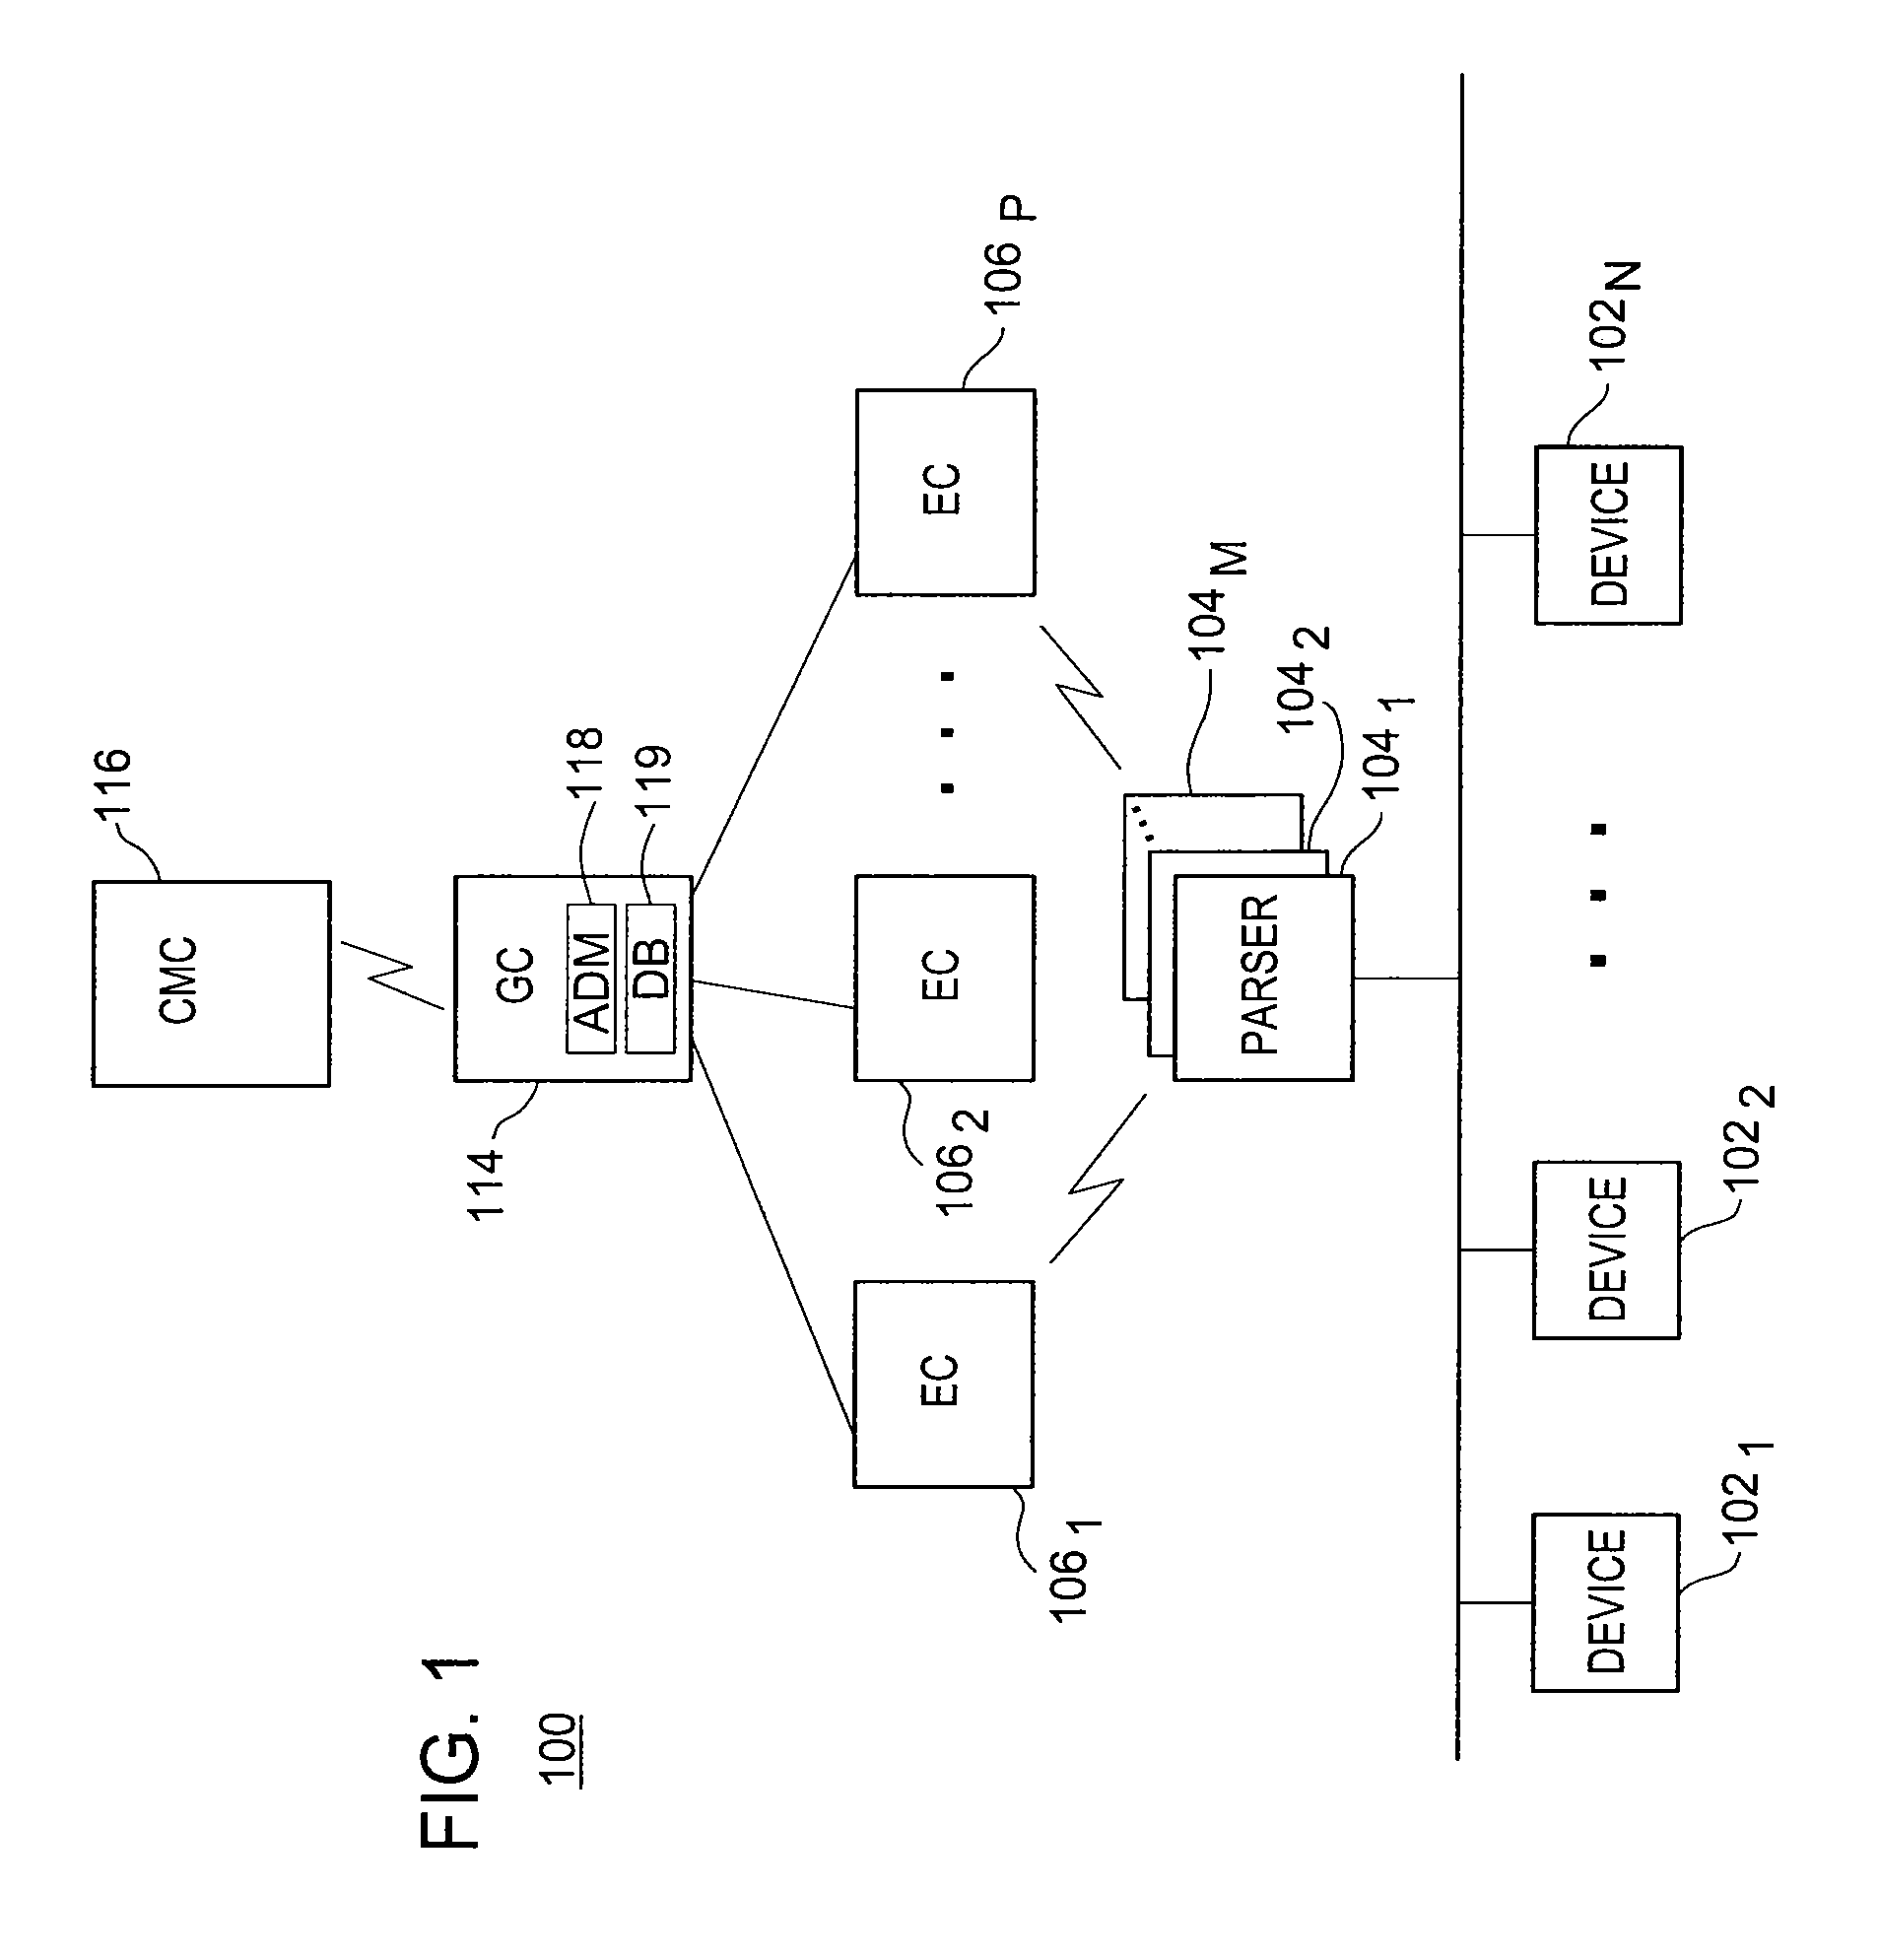 Method and apparatus for suppressing duplicate alarms